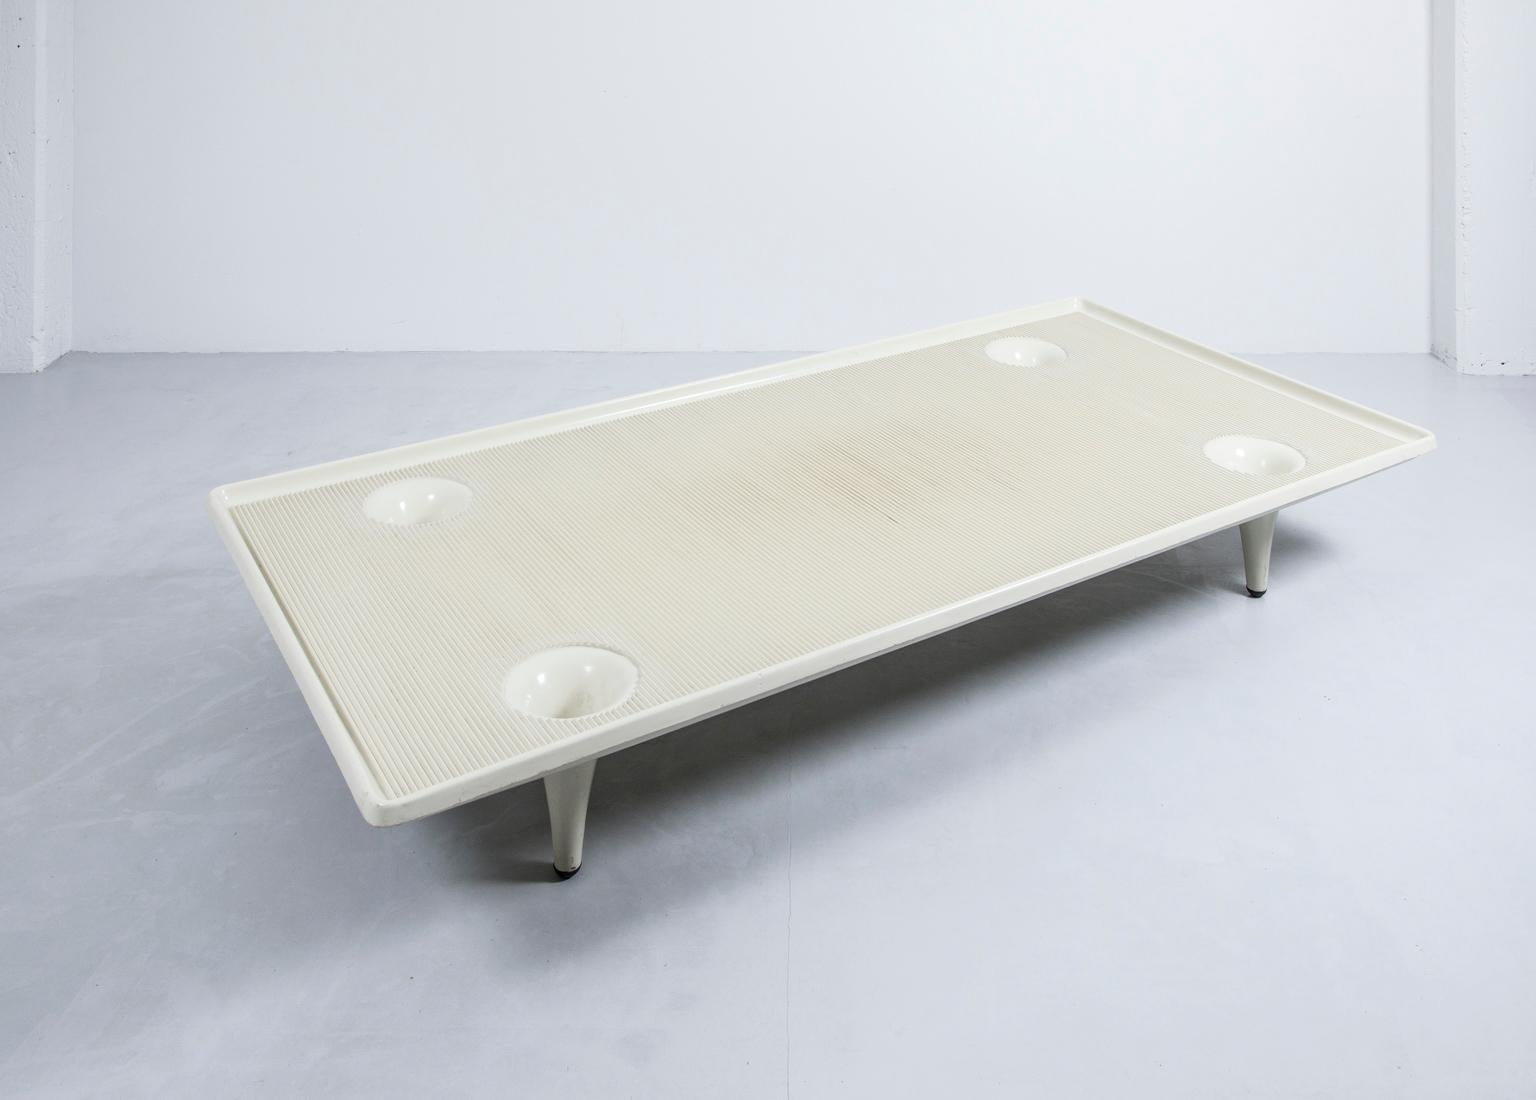 This stackable daybed was designed by Andreas Christen for H.P. Spengler in Switzerland in the 1960s. The material and white color give the daybed its space design and makes it look very modern.